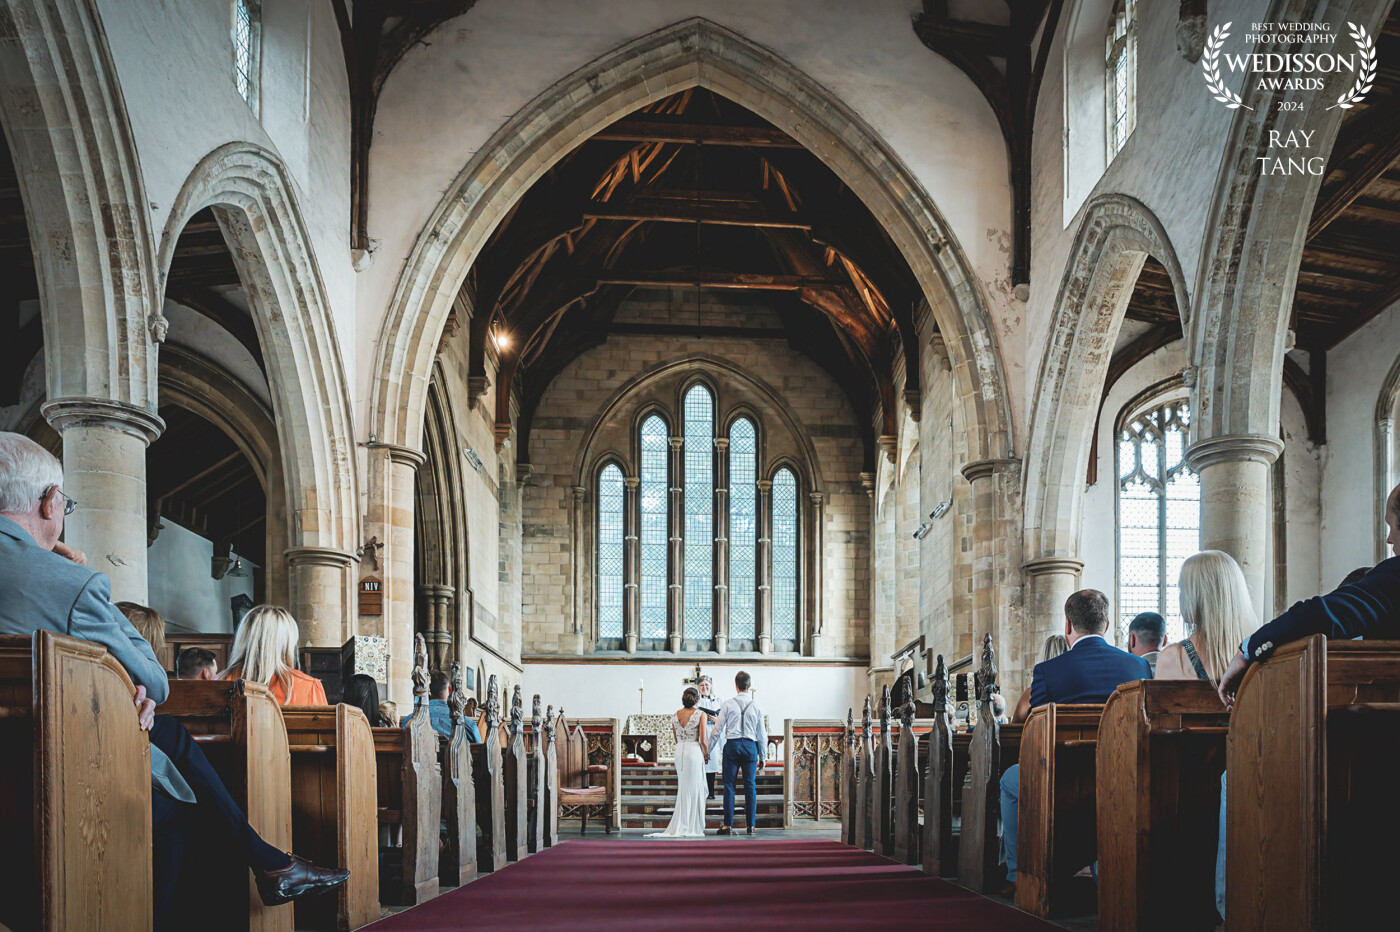 Capturing timeless moments of love at the enchanting All Saints Church, Thornham, UK.  Surrounded by the historic charm and breath-taking beauty of this sacred venue.